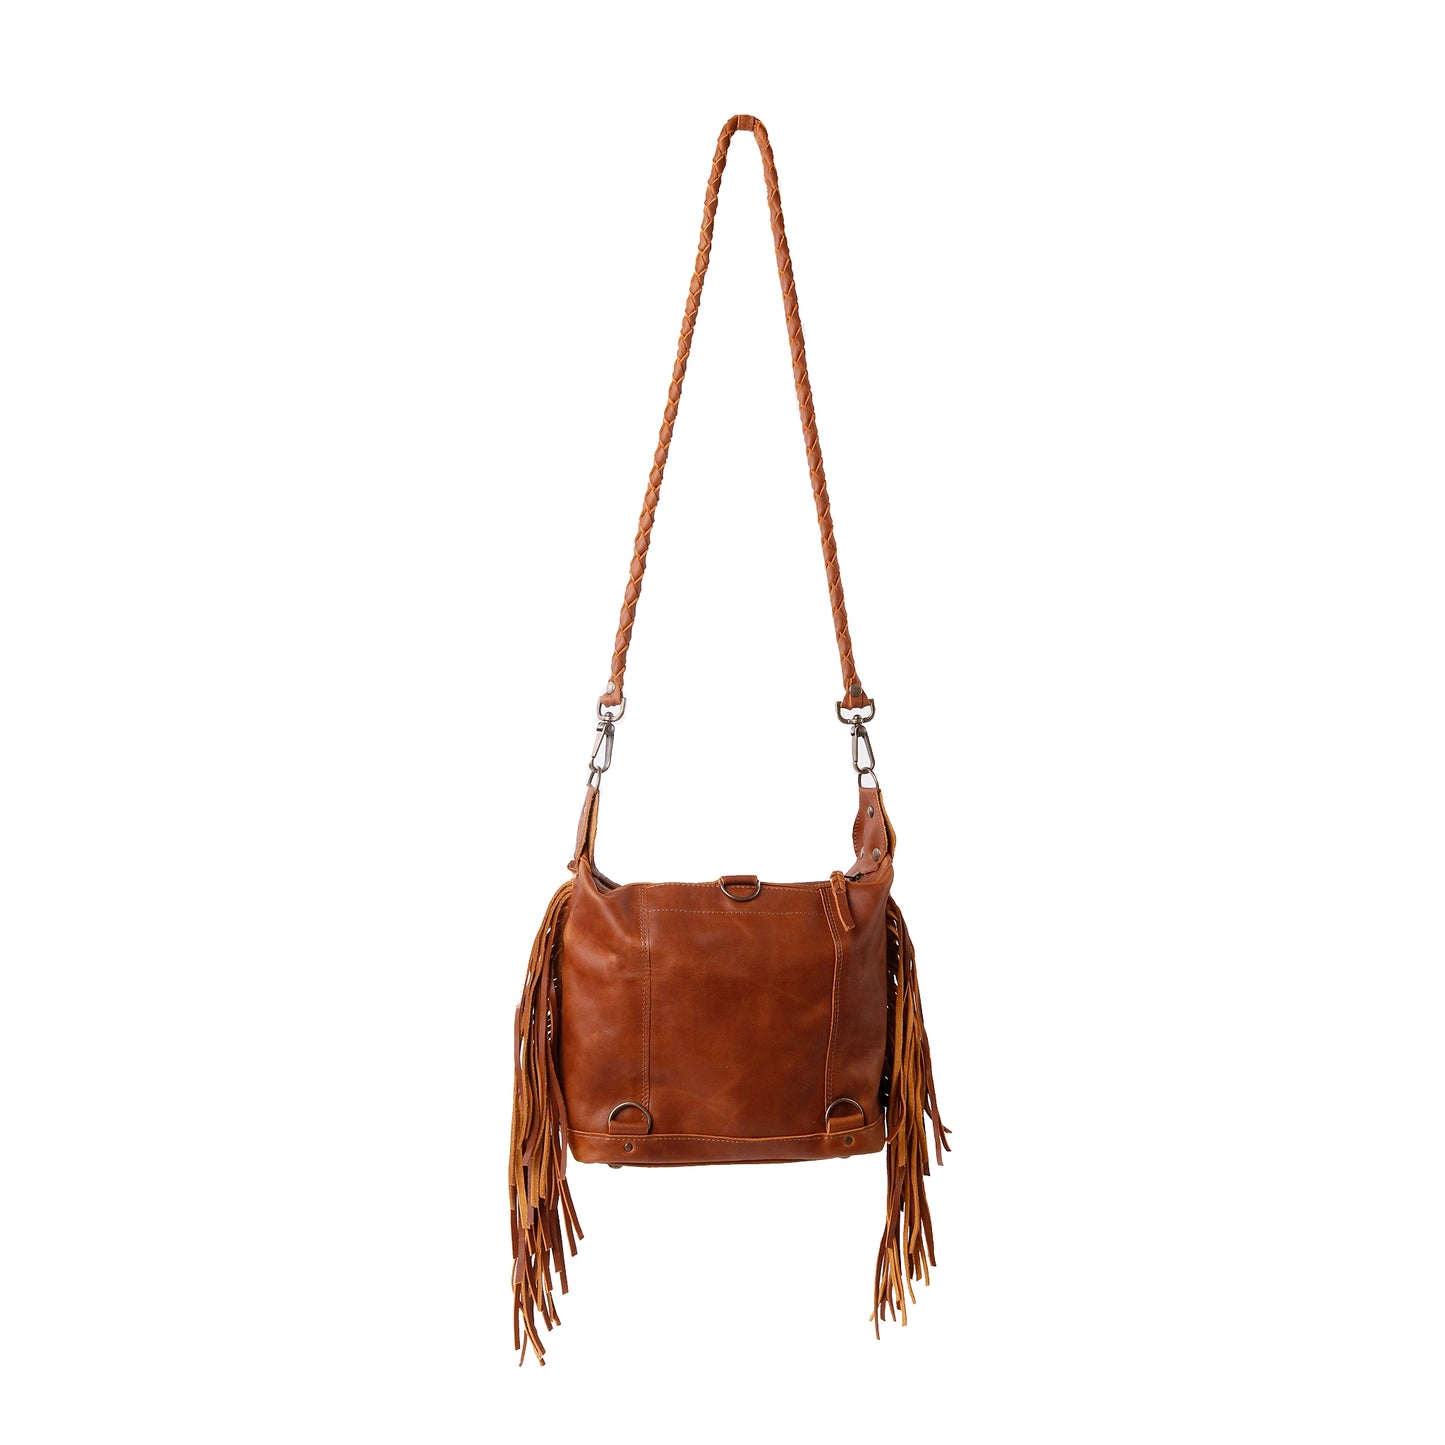 H&S BEATRIZ MINI CONVERTIBLE DAY BAG WITH FRINGE - OOAK PANEL - CAFE - NO. 12878